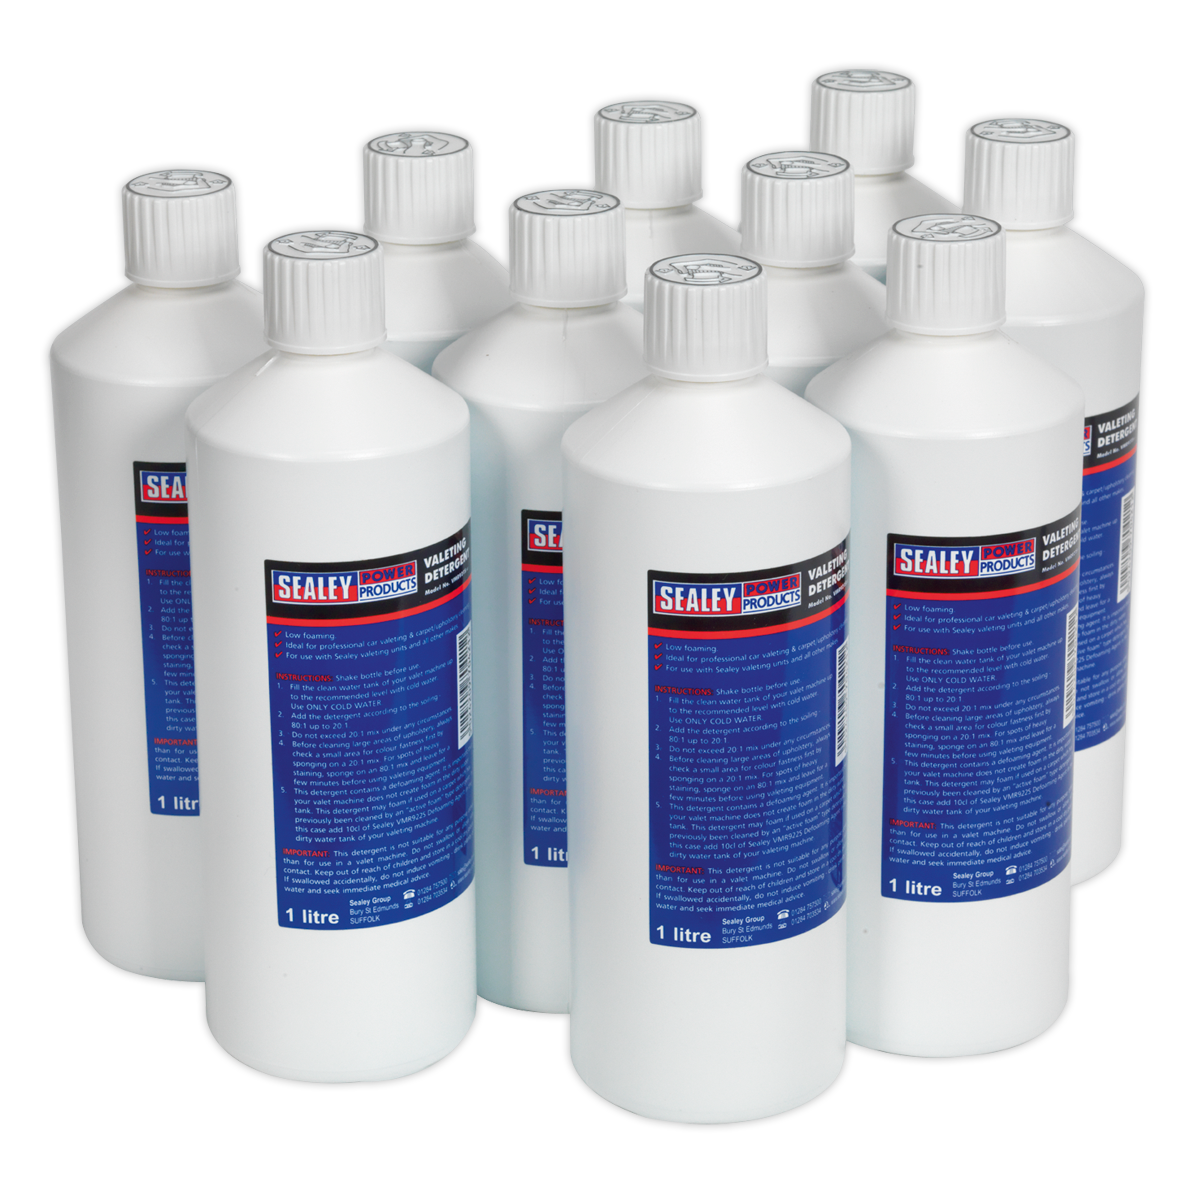 Sealey Carpet/Upholstery Detergent 1L - Pack of 10